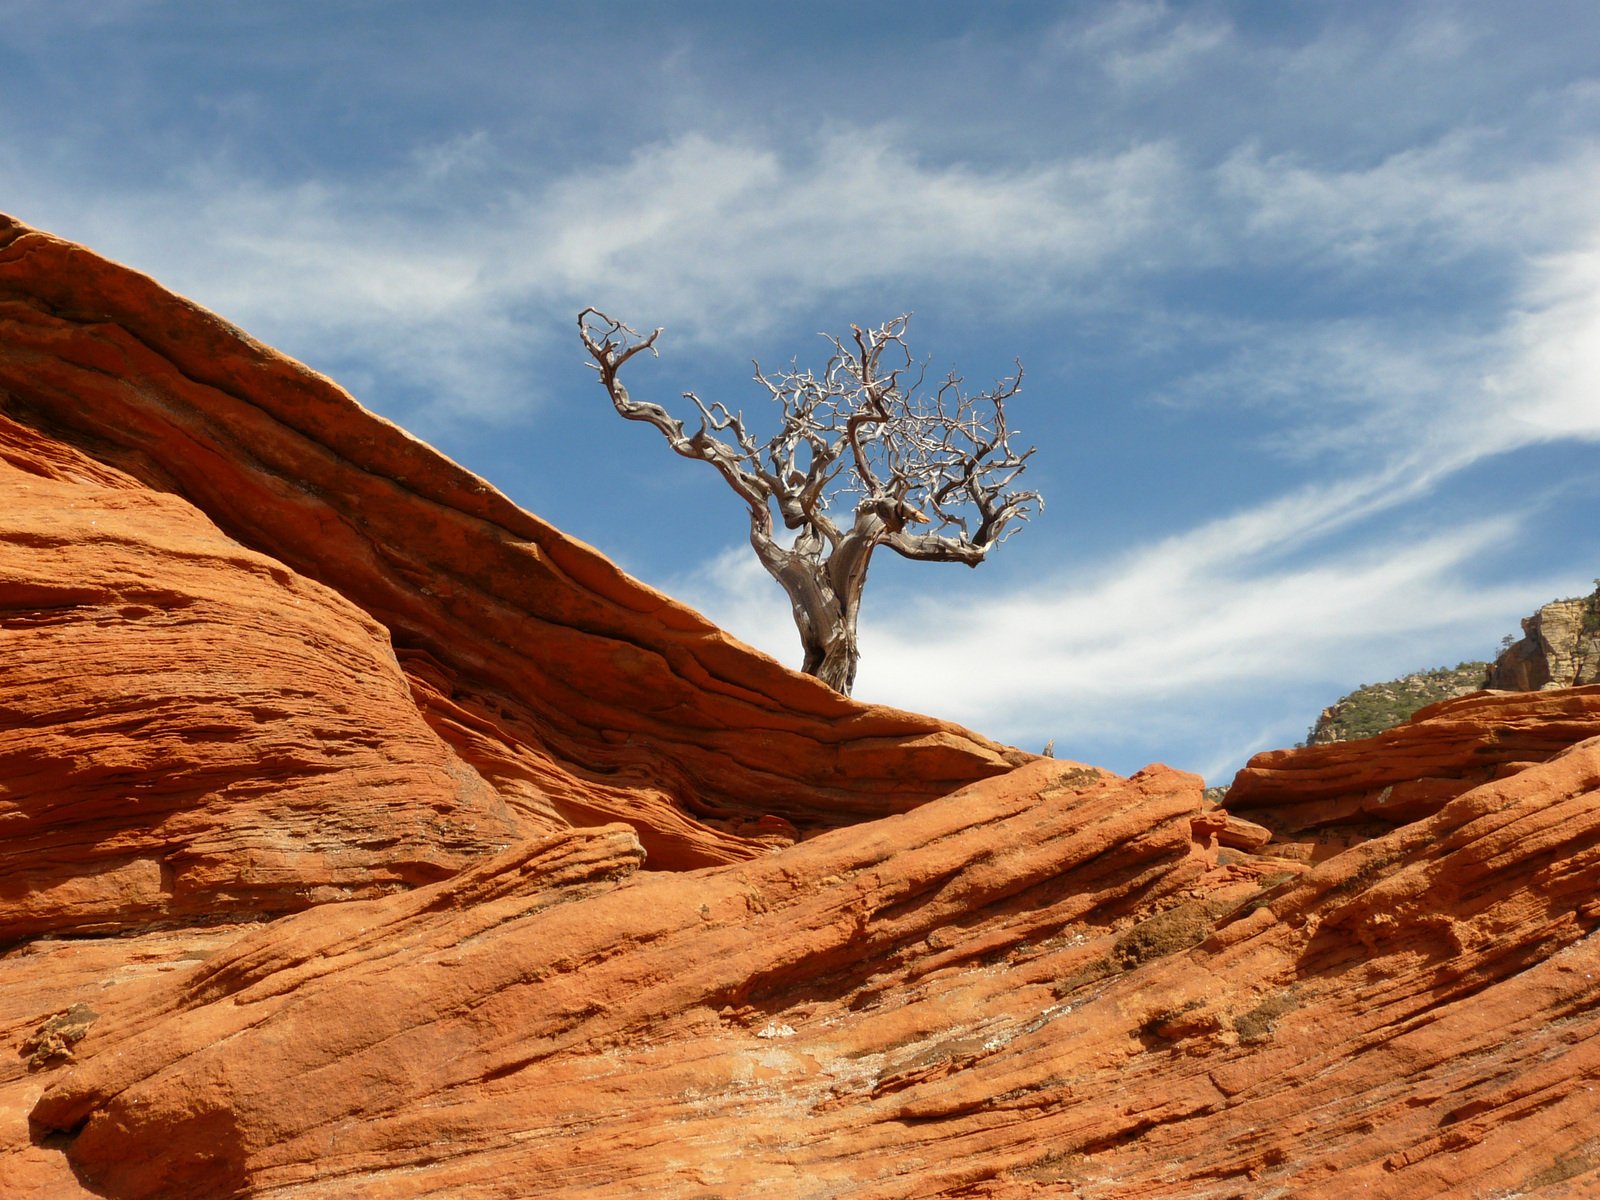 a lone tree stands on a rocky ledge